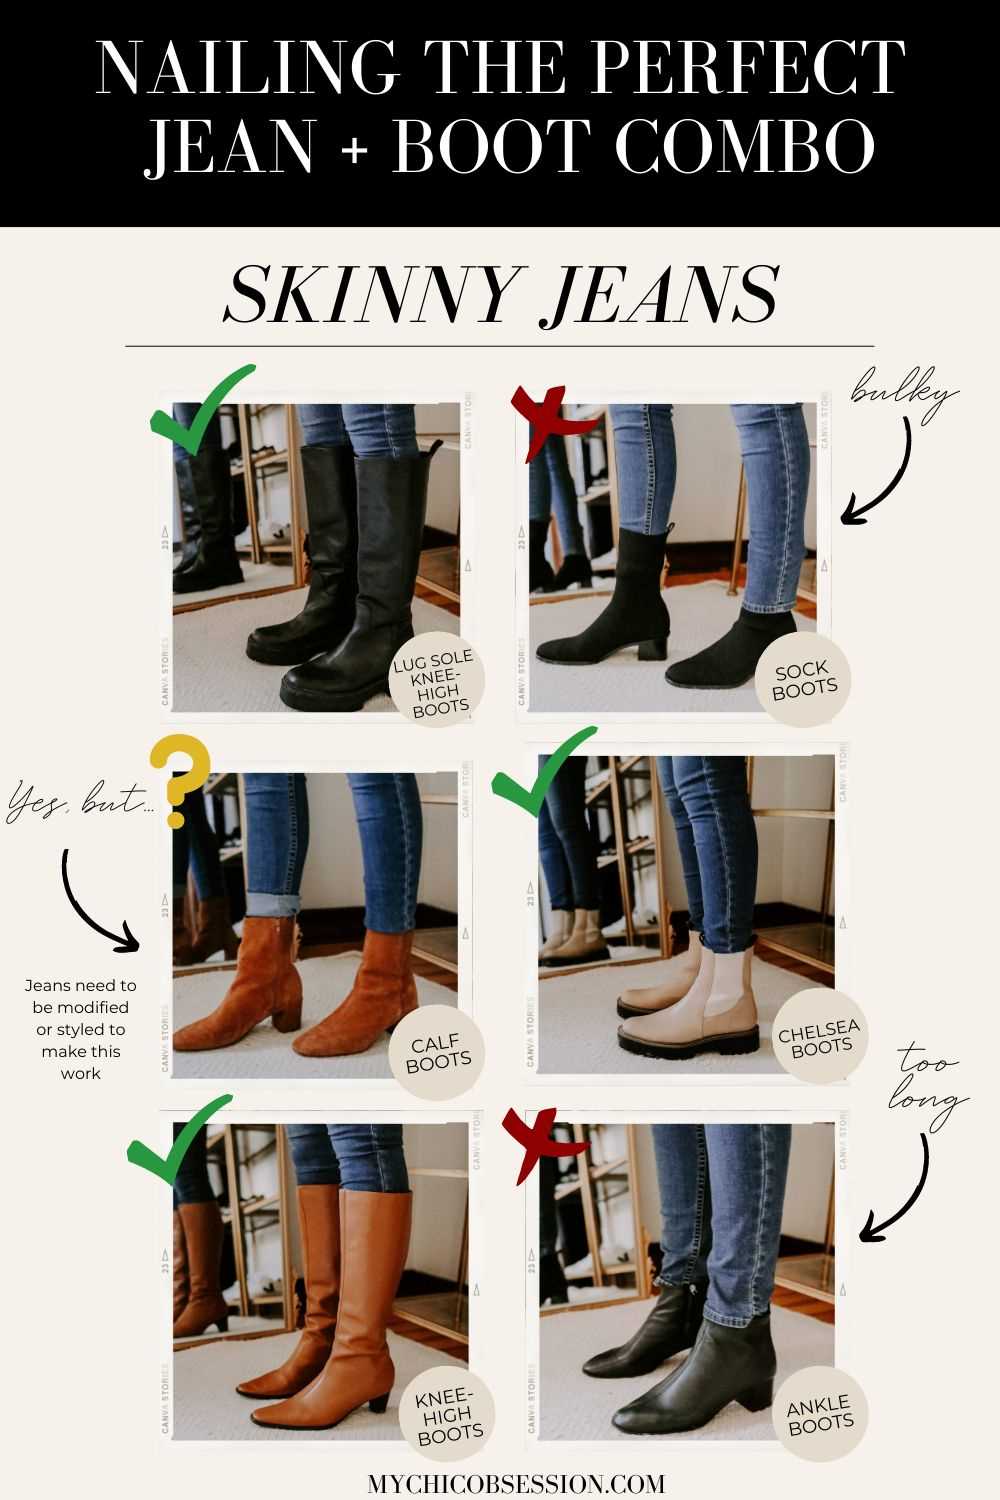 Styling Tips: Ankle Boots with Skinny Jeans